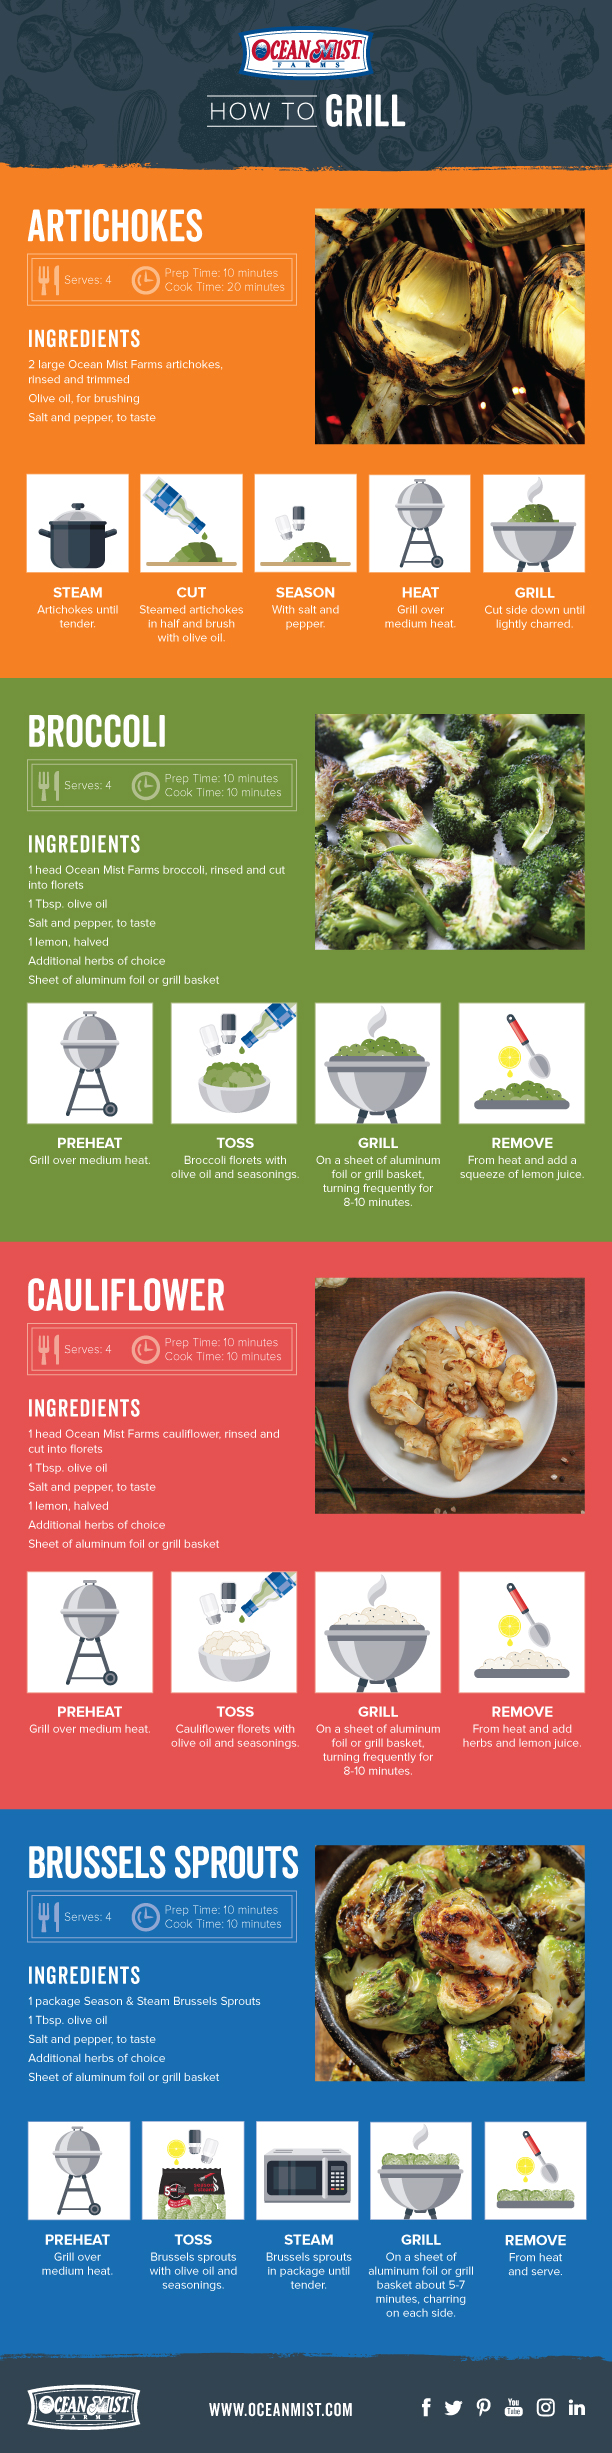 OM_How-to-Grill_Infographic